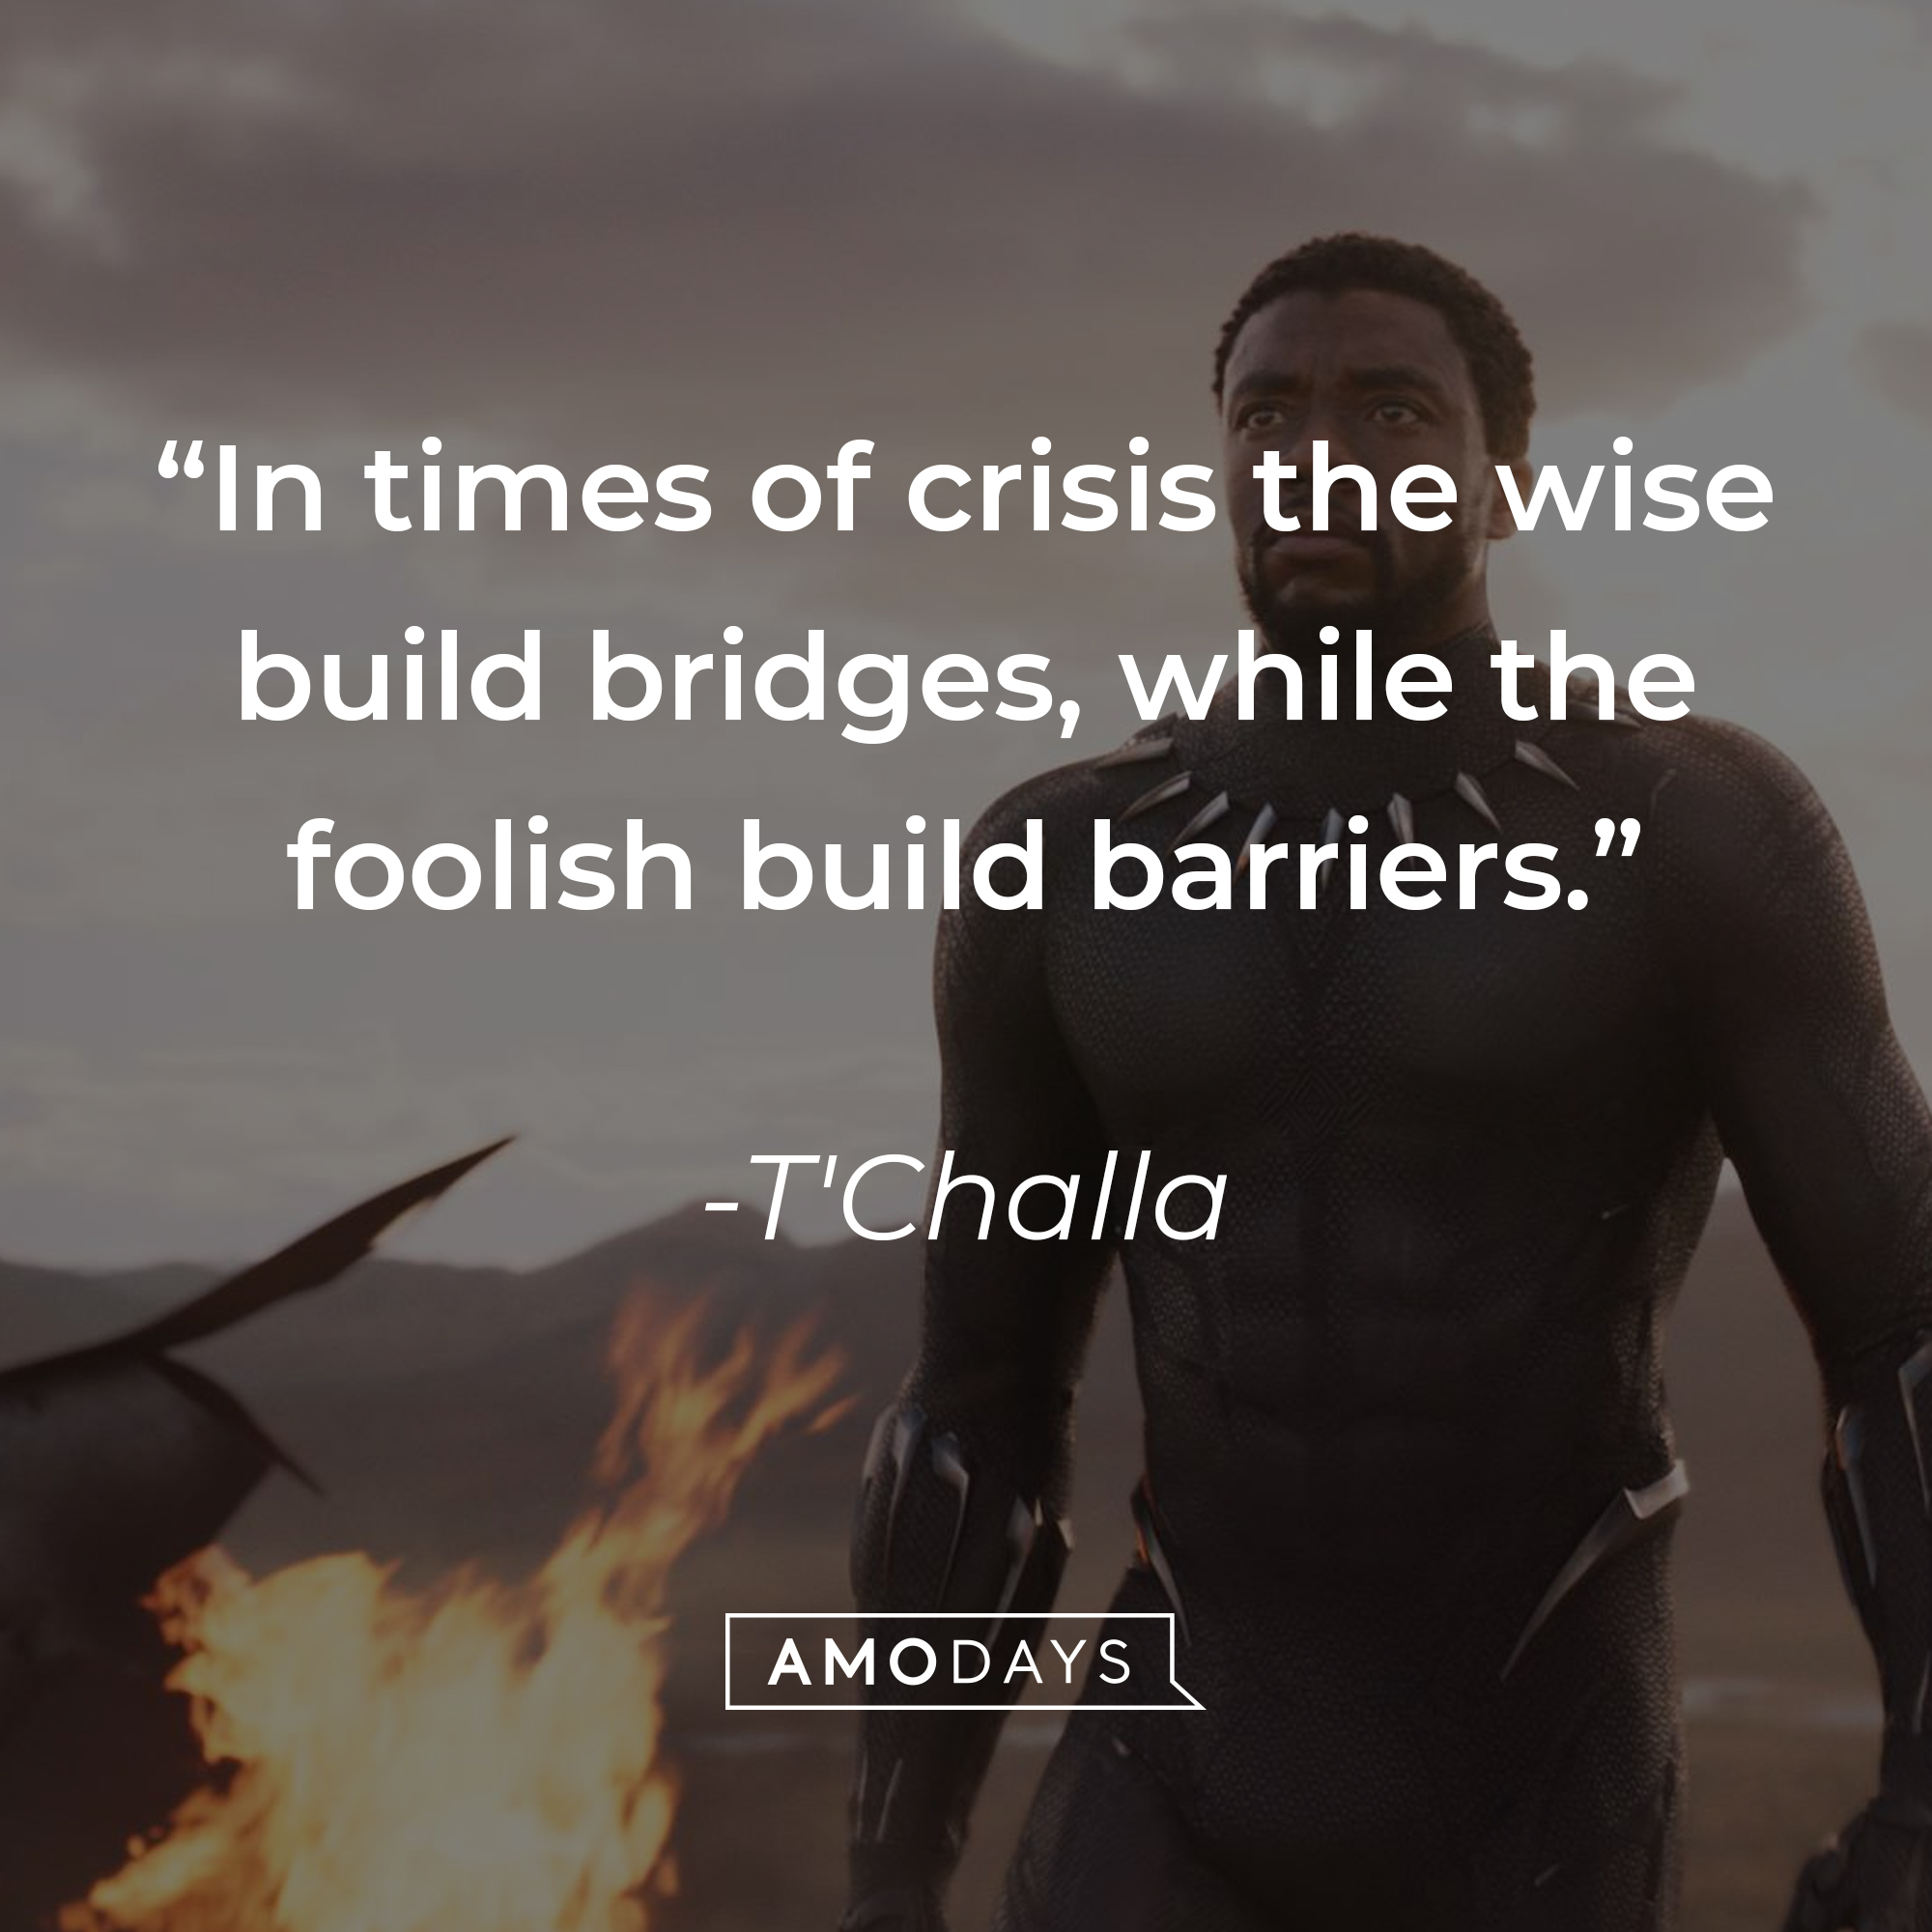 T'Challa's quote: “In times of crisis the wise build bridges, while the foolish build barriers.” | Source: facebook.com/BlackPantherMovie